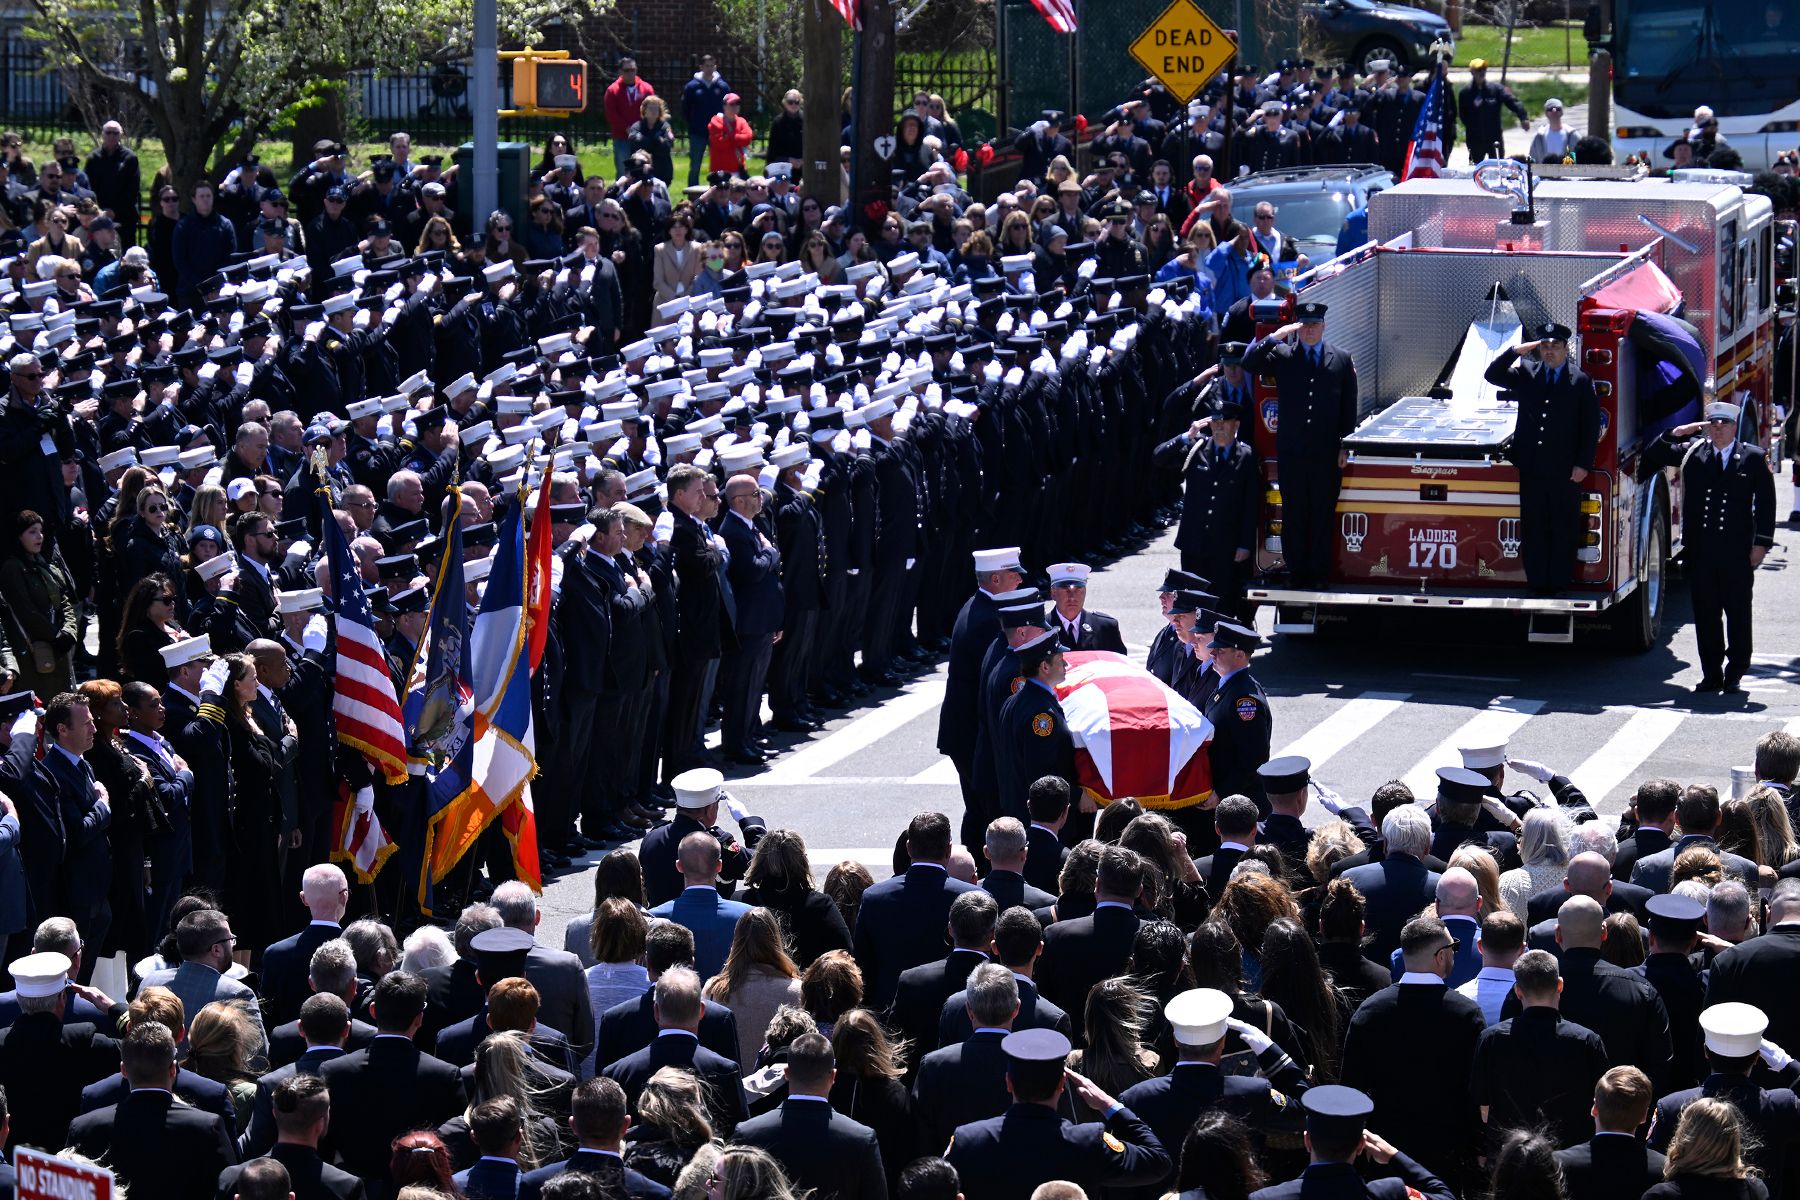 Funeral for FDNY Timothy KLEIN